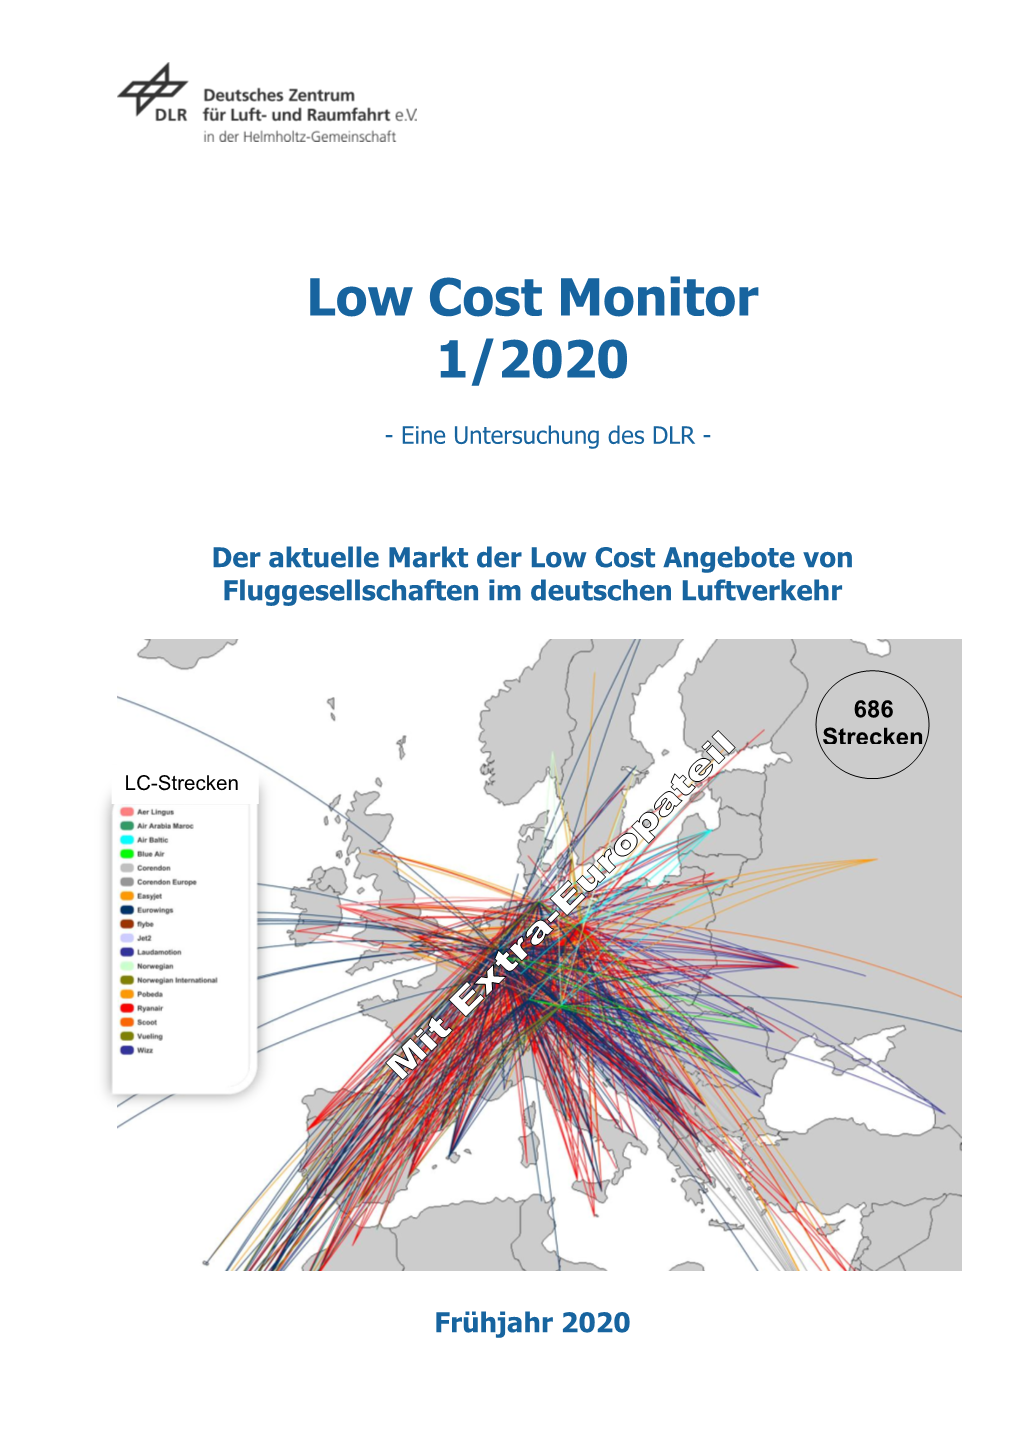 Low Cost Monitor 1/2020